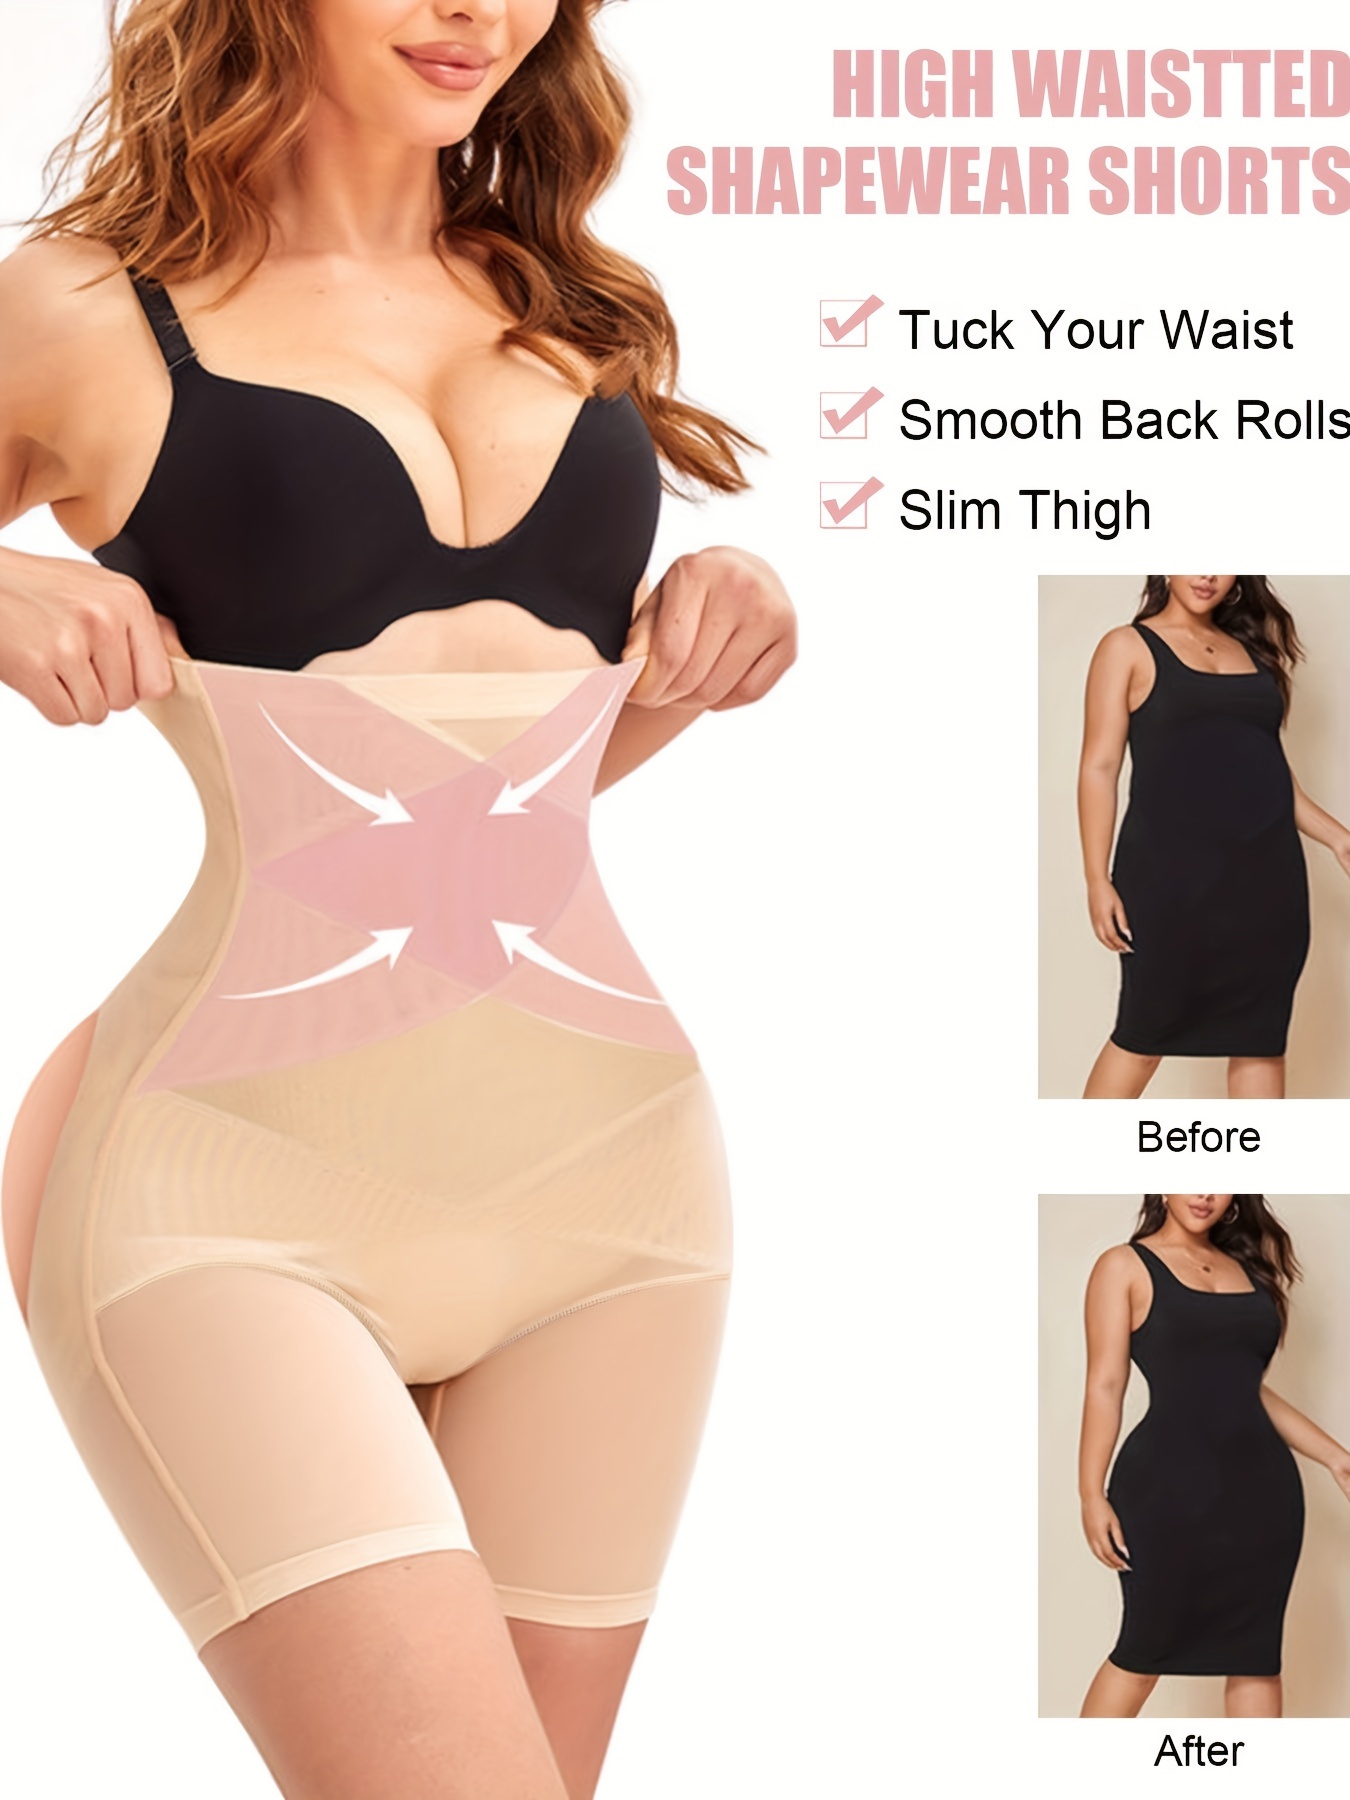 High Waisted Tummy Tucker Shapewear Shorts For Women With Smooth